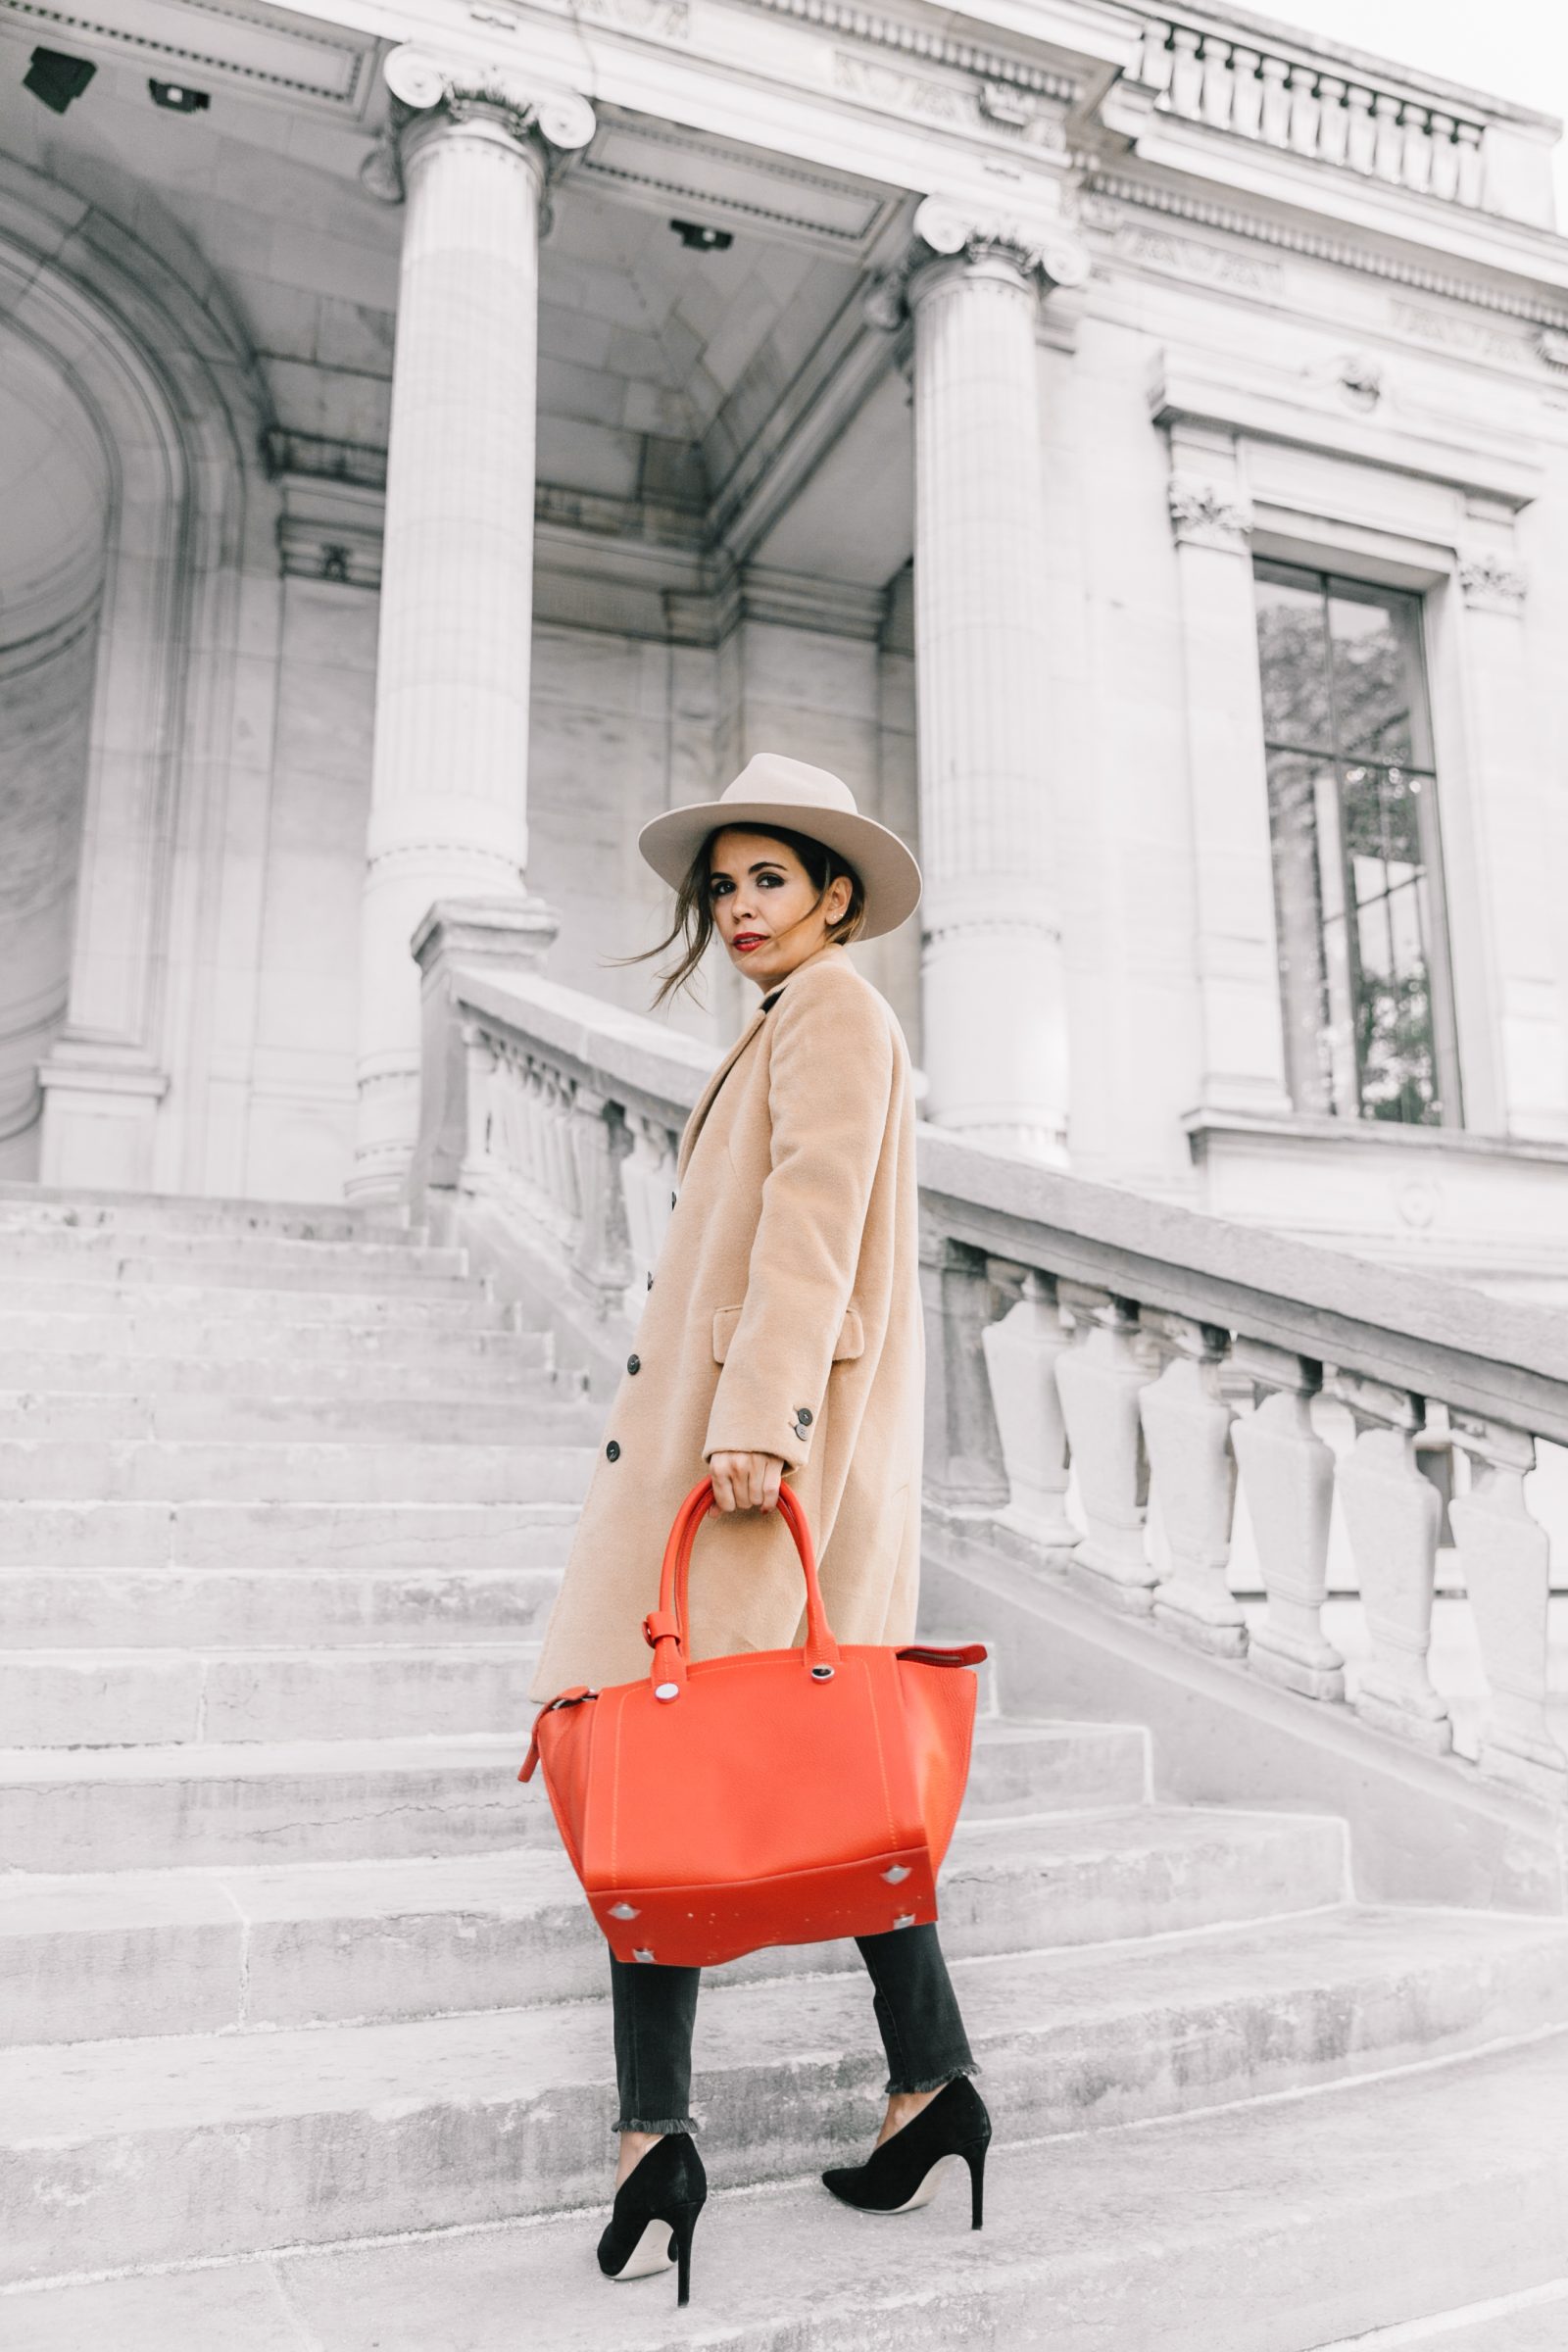 pfw-paris_fashion_week_ss17-street_style-outfits-collage_vintage-max_and_co-camel_coat-orange_bag-skinny_jeans-sandro_shoes-hat-sincerely_jules_jeans-14